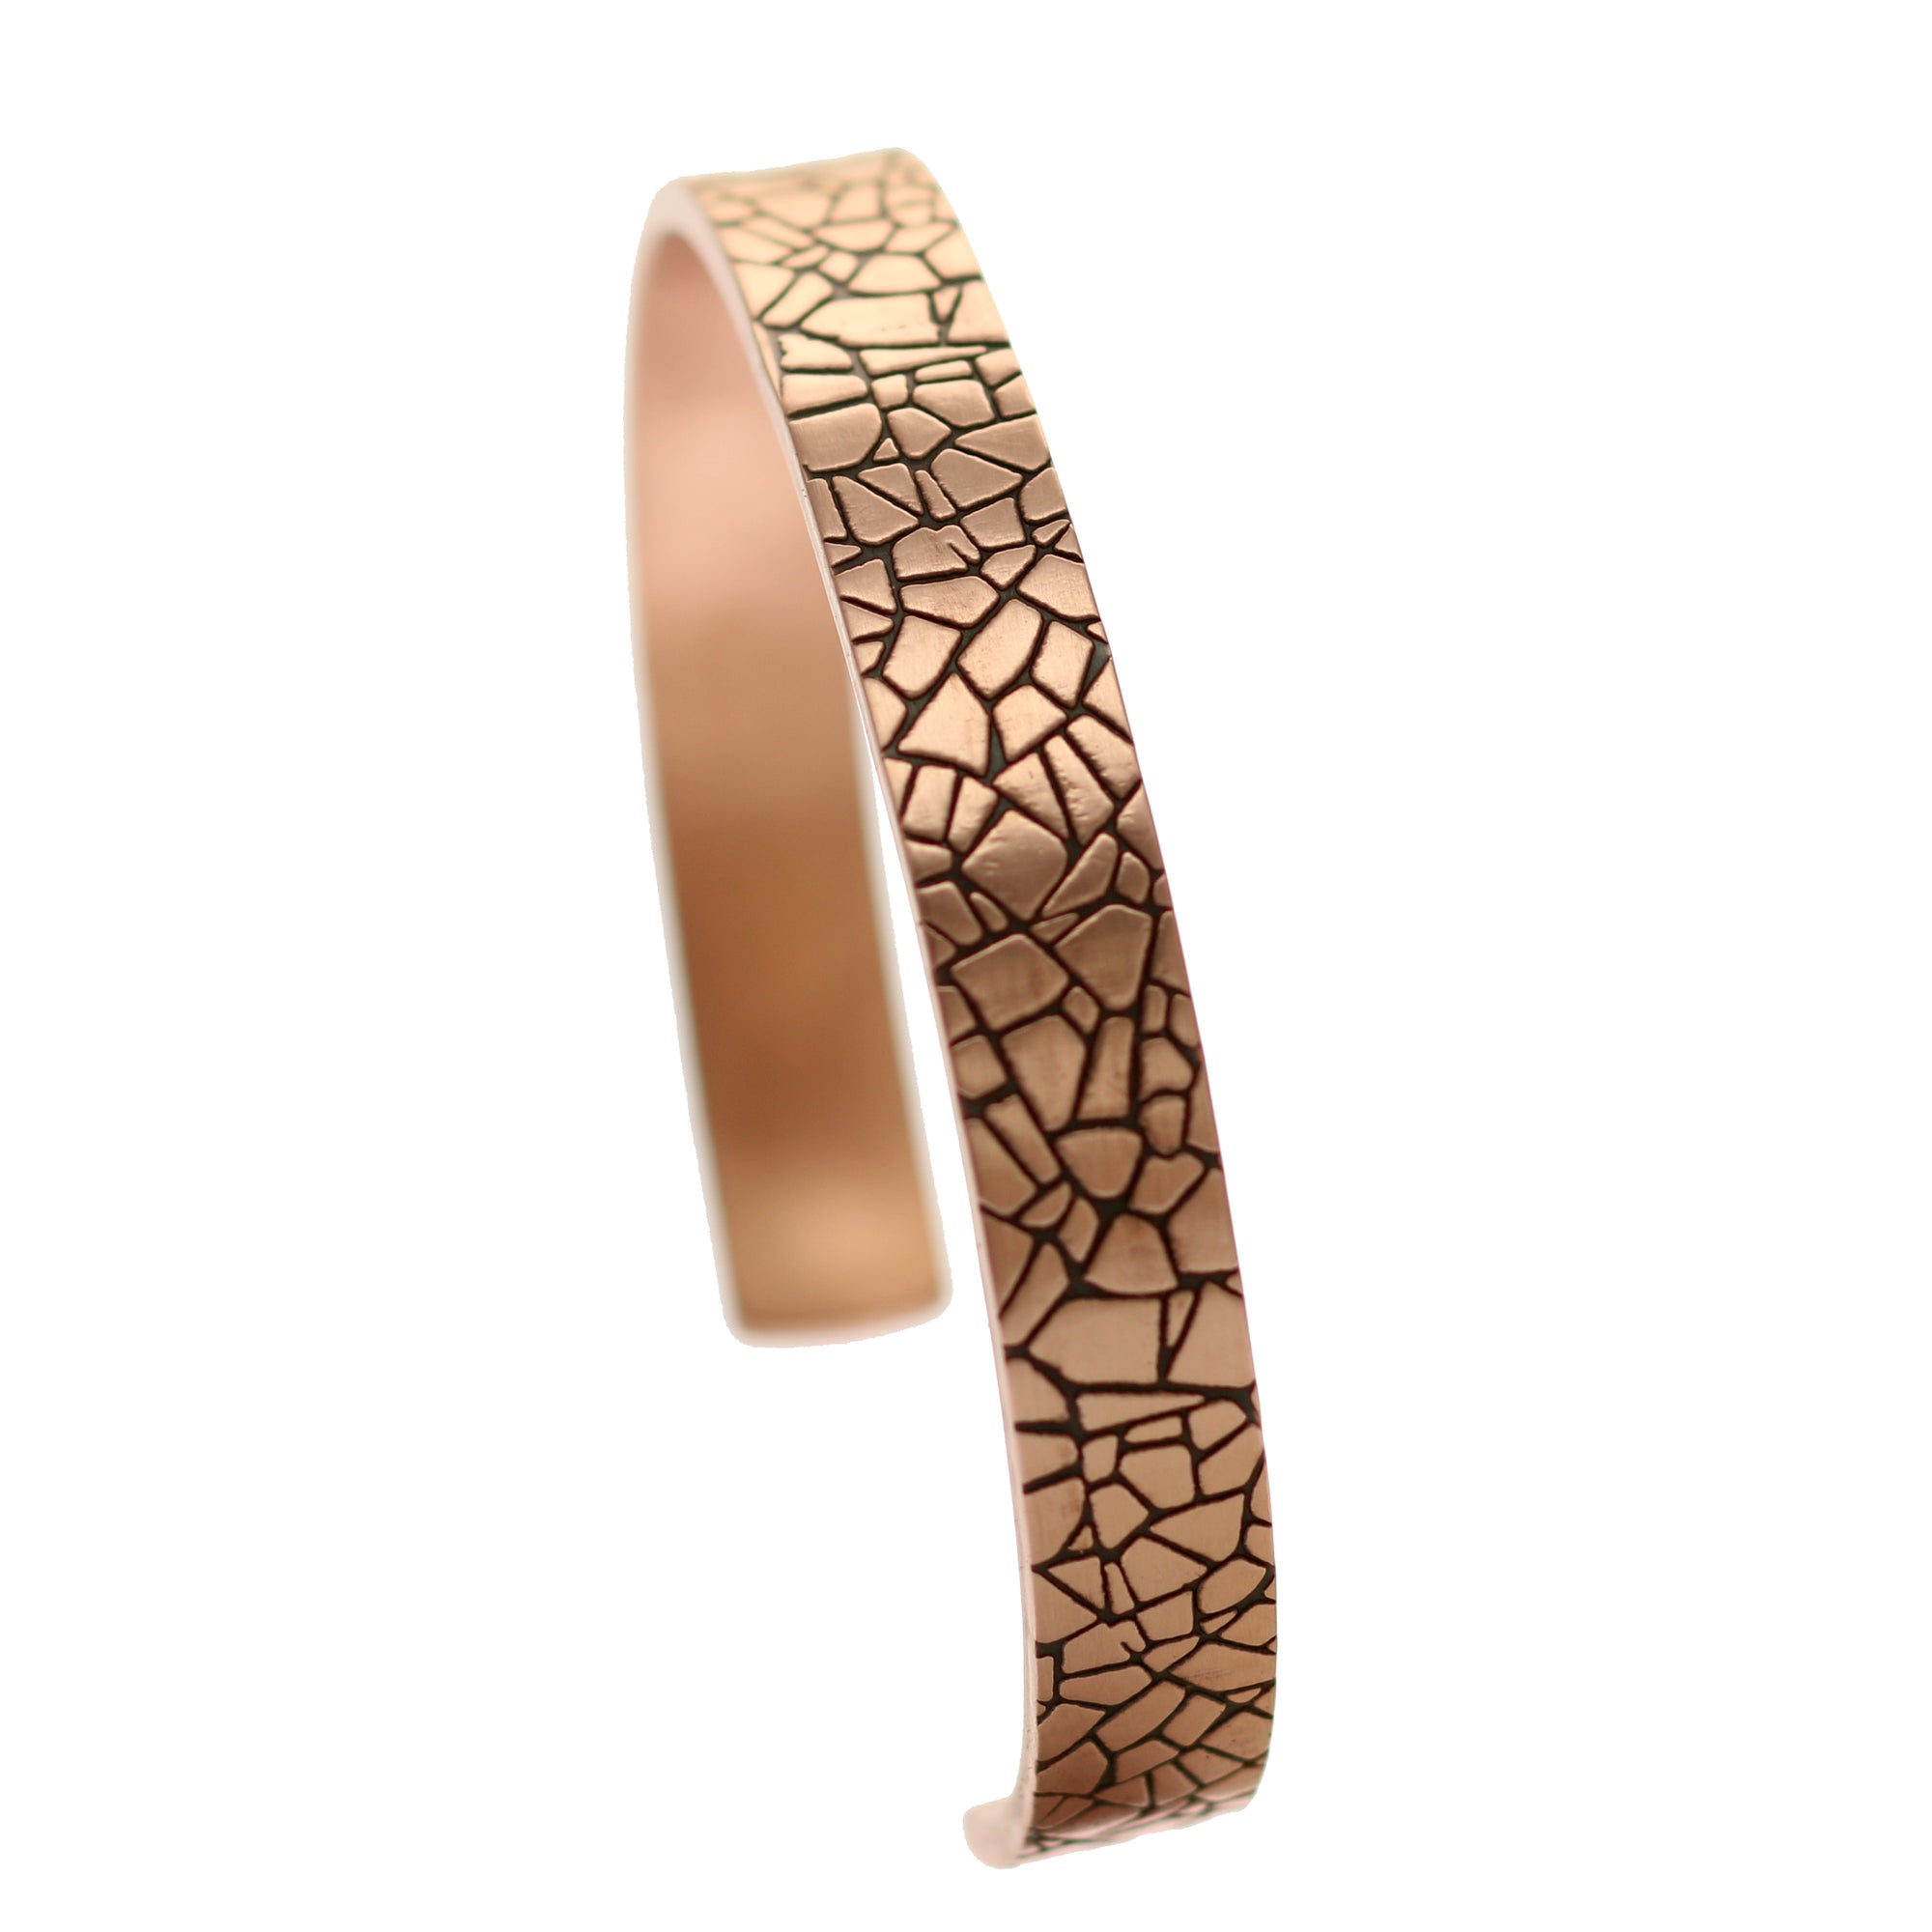 Left View of 10mm Wide Men's Embossed Mosaic Solid Copper Cuff